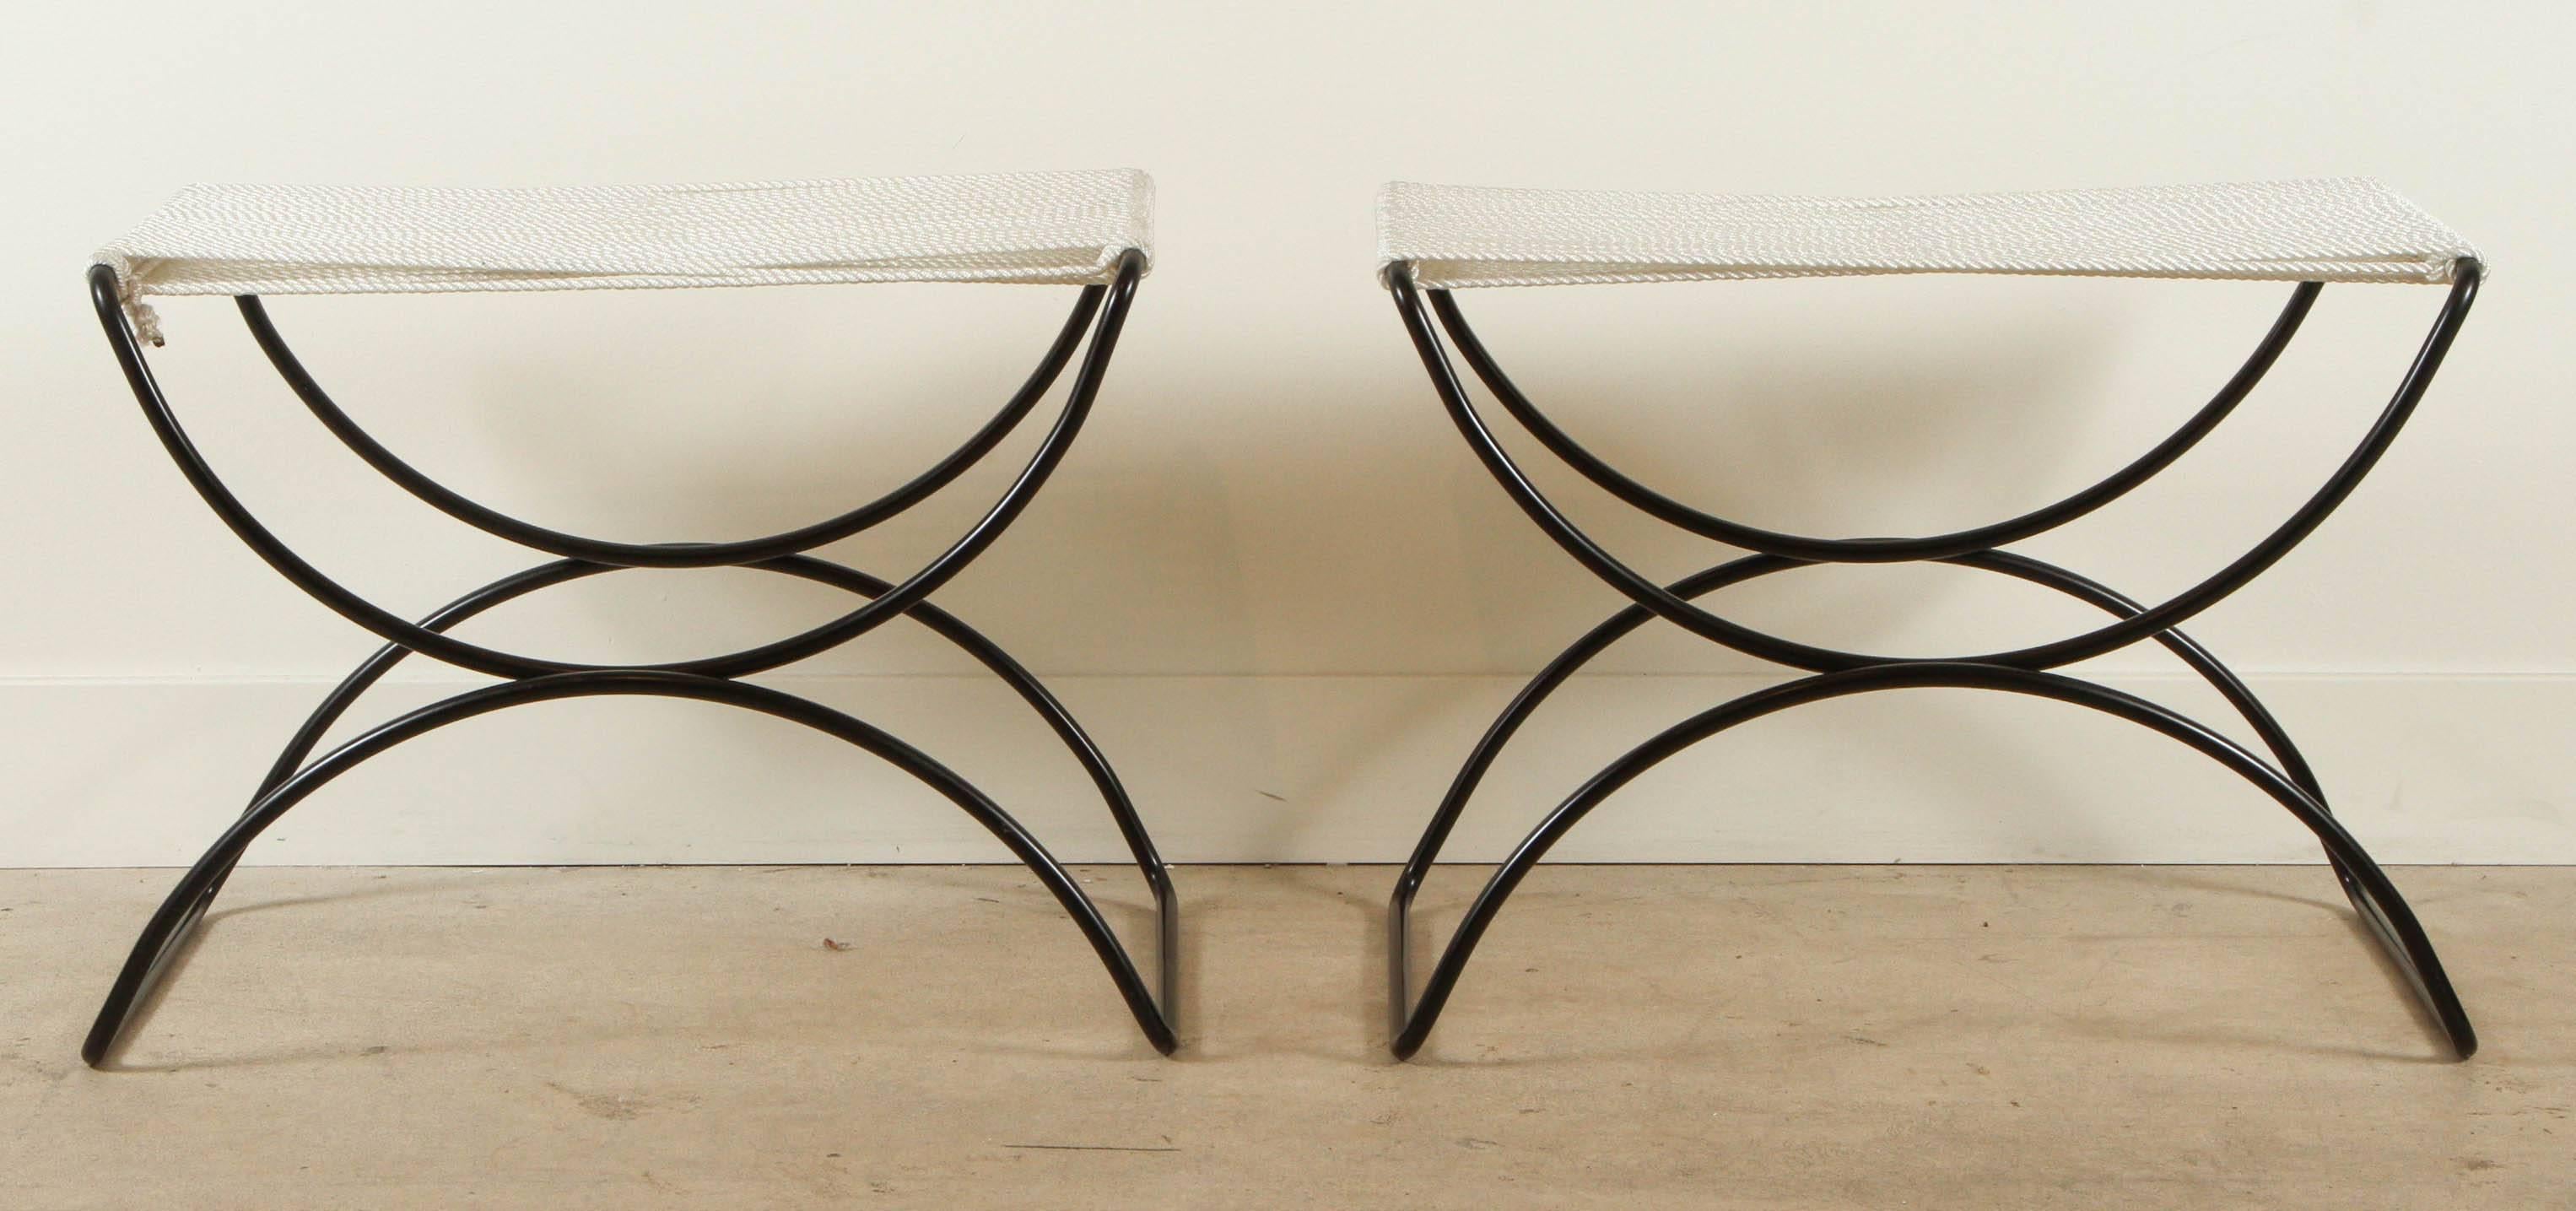 Rope Indoor/Outdoor Pompeii Stool by Ten10. Powder-coated with marine grade rope. 

Ten10 is a Los Angeles based company founded in 1997. After years of providing custom residential and commercial design solutions to our clients, they began